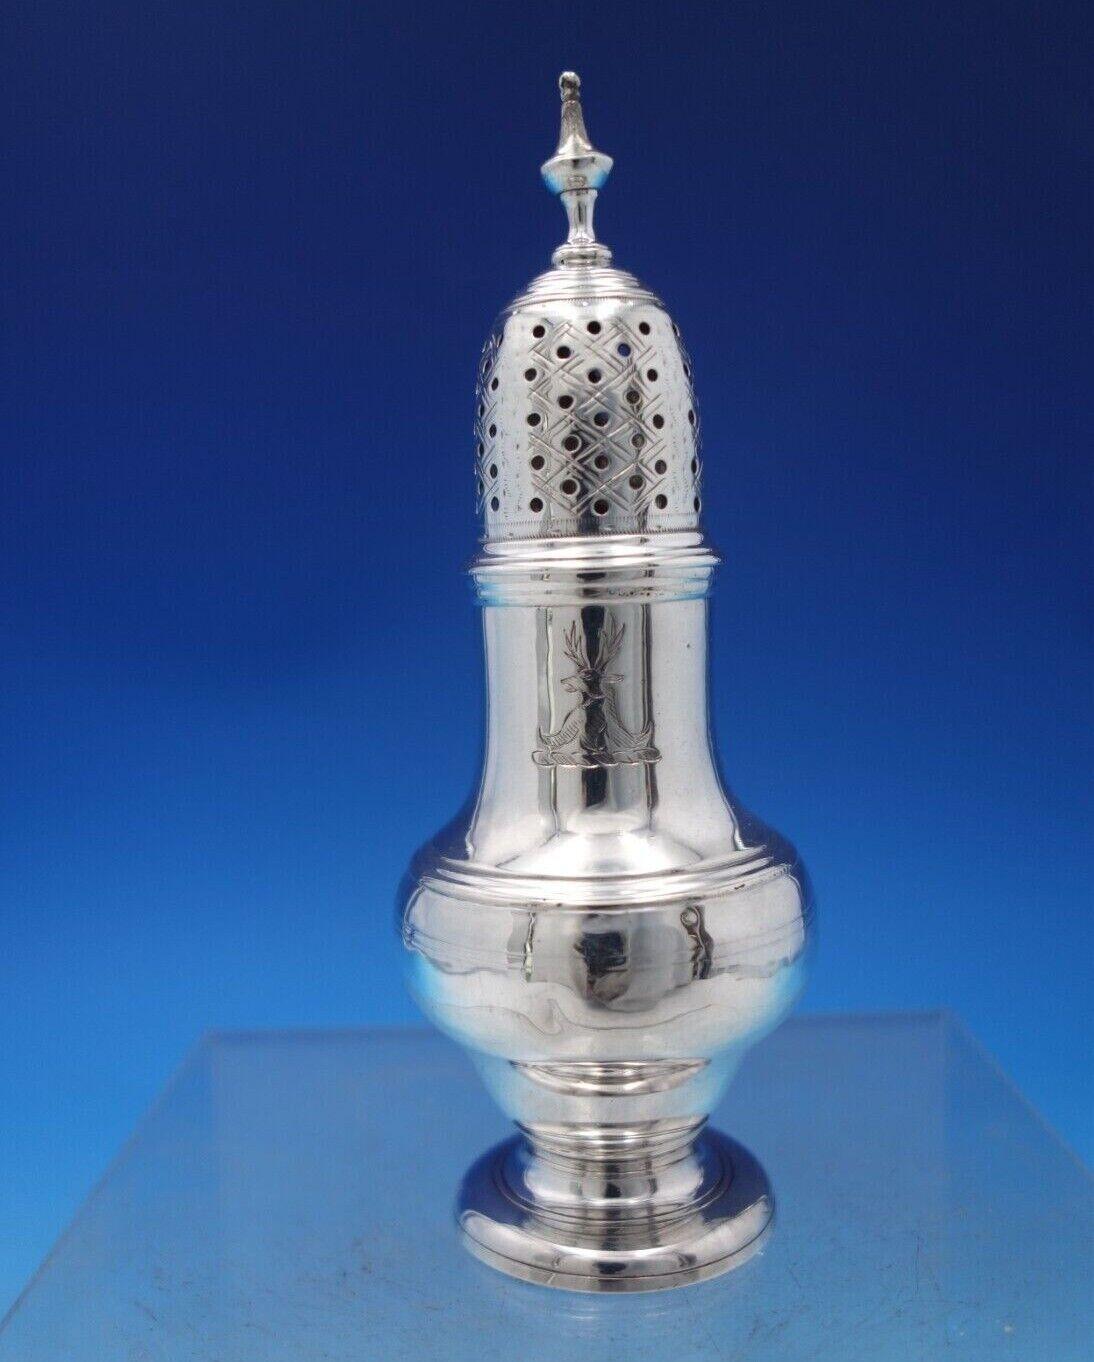 English Georgian sterling silver salt and pepper shaker two-piece set made in London circa 1788 (worn marks/maker unknown). This set features engraved lids and has an animal engraving (see photos). The shakers measure 5